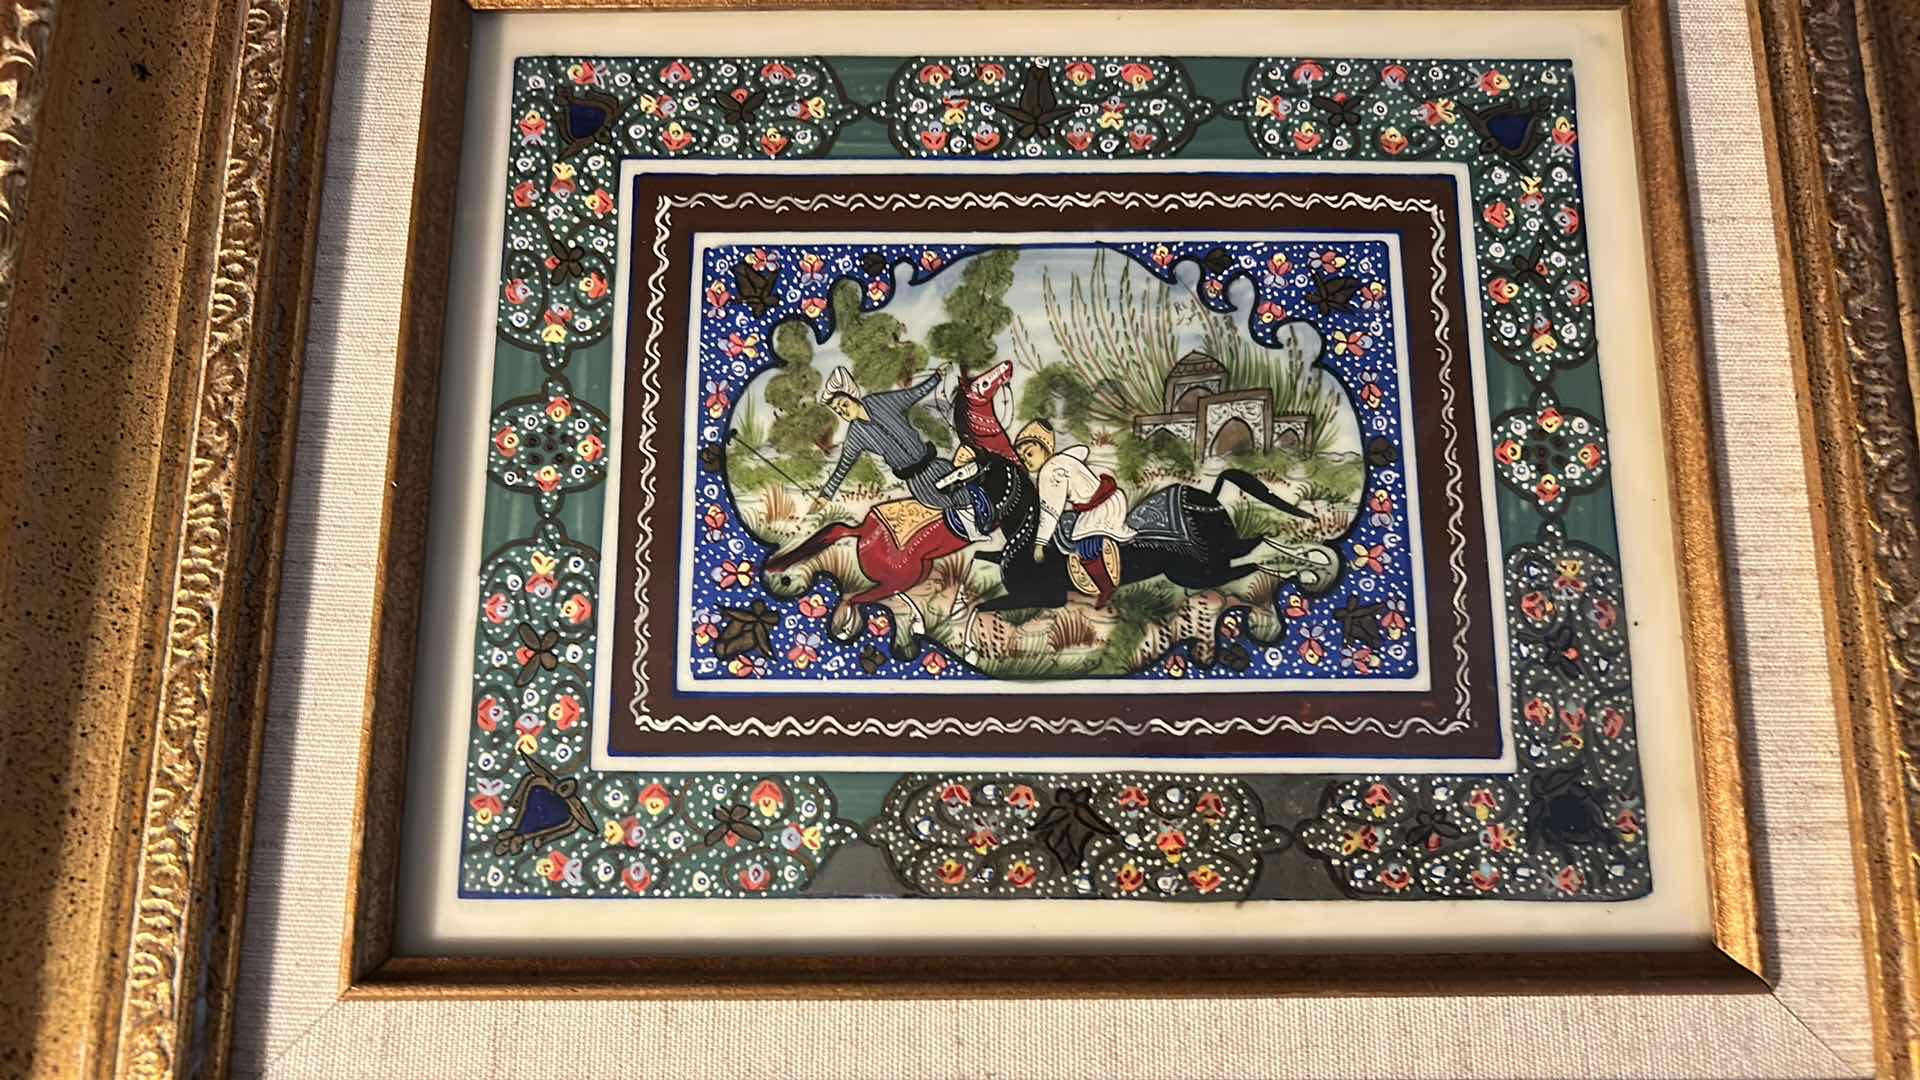 Photo 2 of WALL DECOR -“POLO MATCH” ORNATE GOLD FRAMED 17 1/2” x 15 1/2”